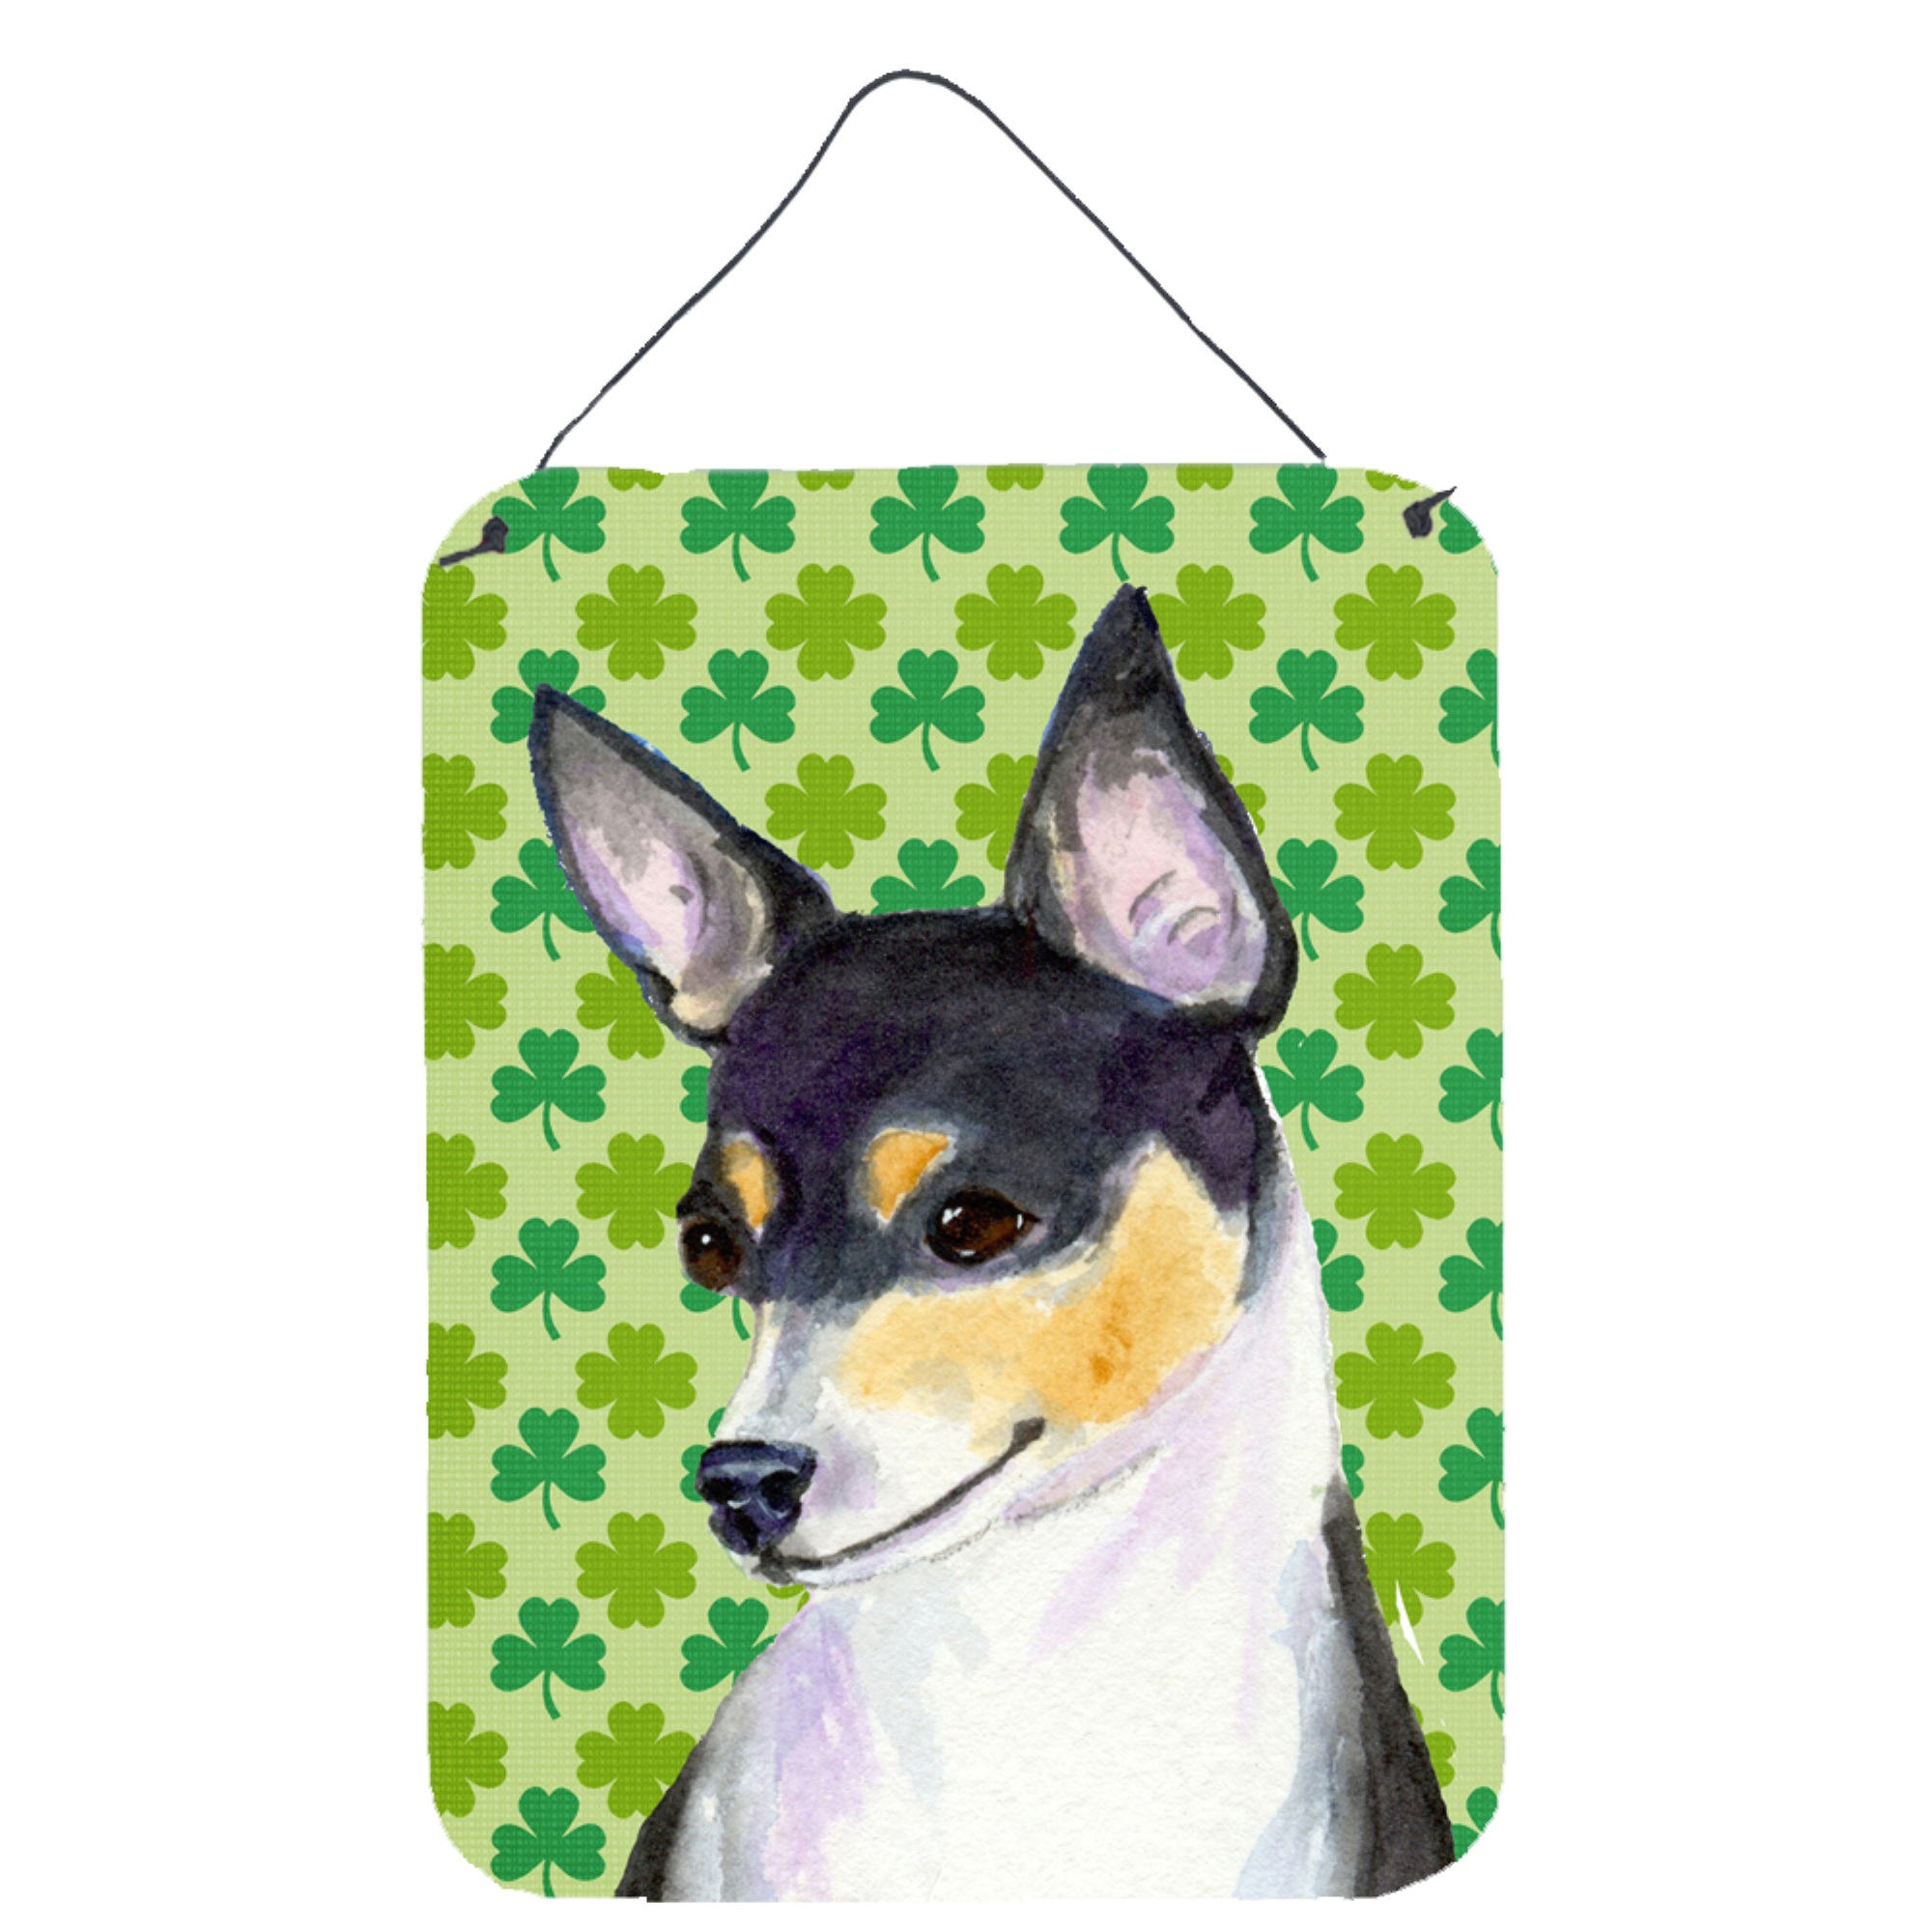 Caroline's Treasures SS4449DS1216 Chihuahua St. Patrick's Day Shamrock Portrait Wall or Door Hanging Prints, 16"" x 12"", Multicolor"